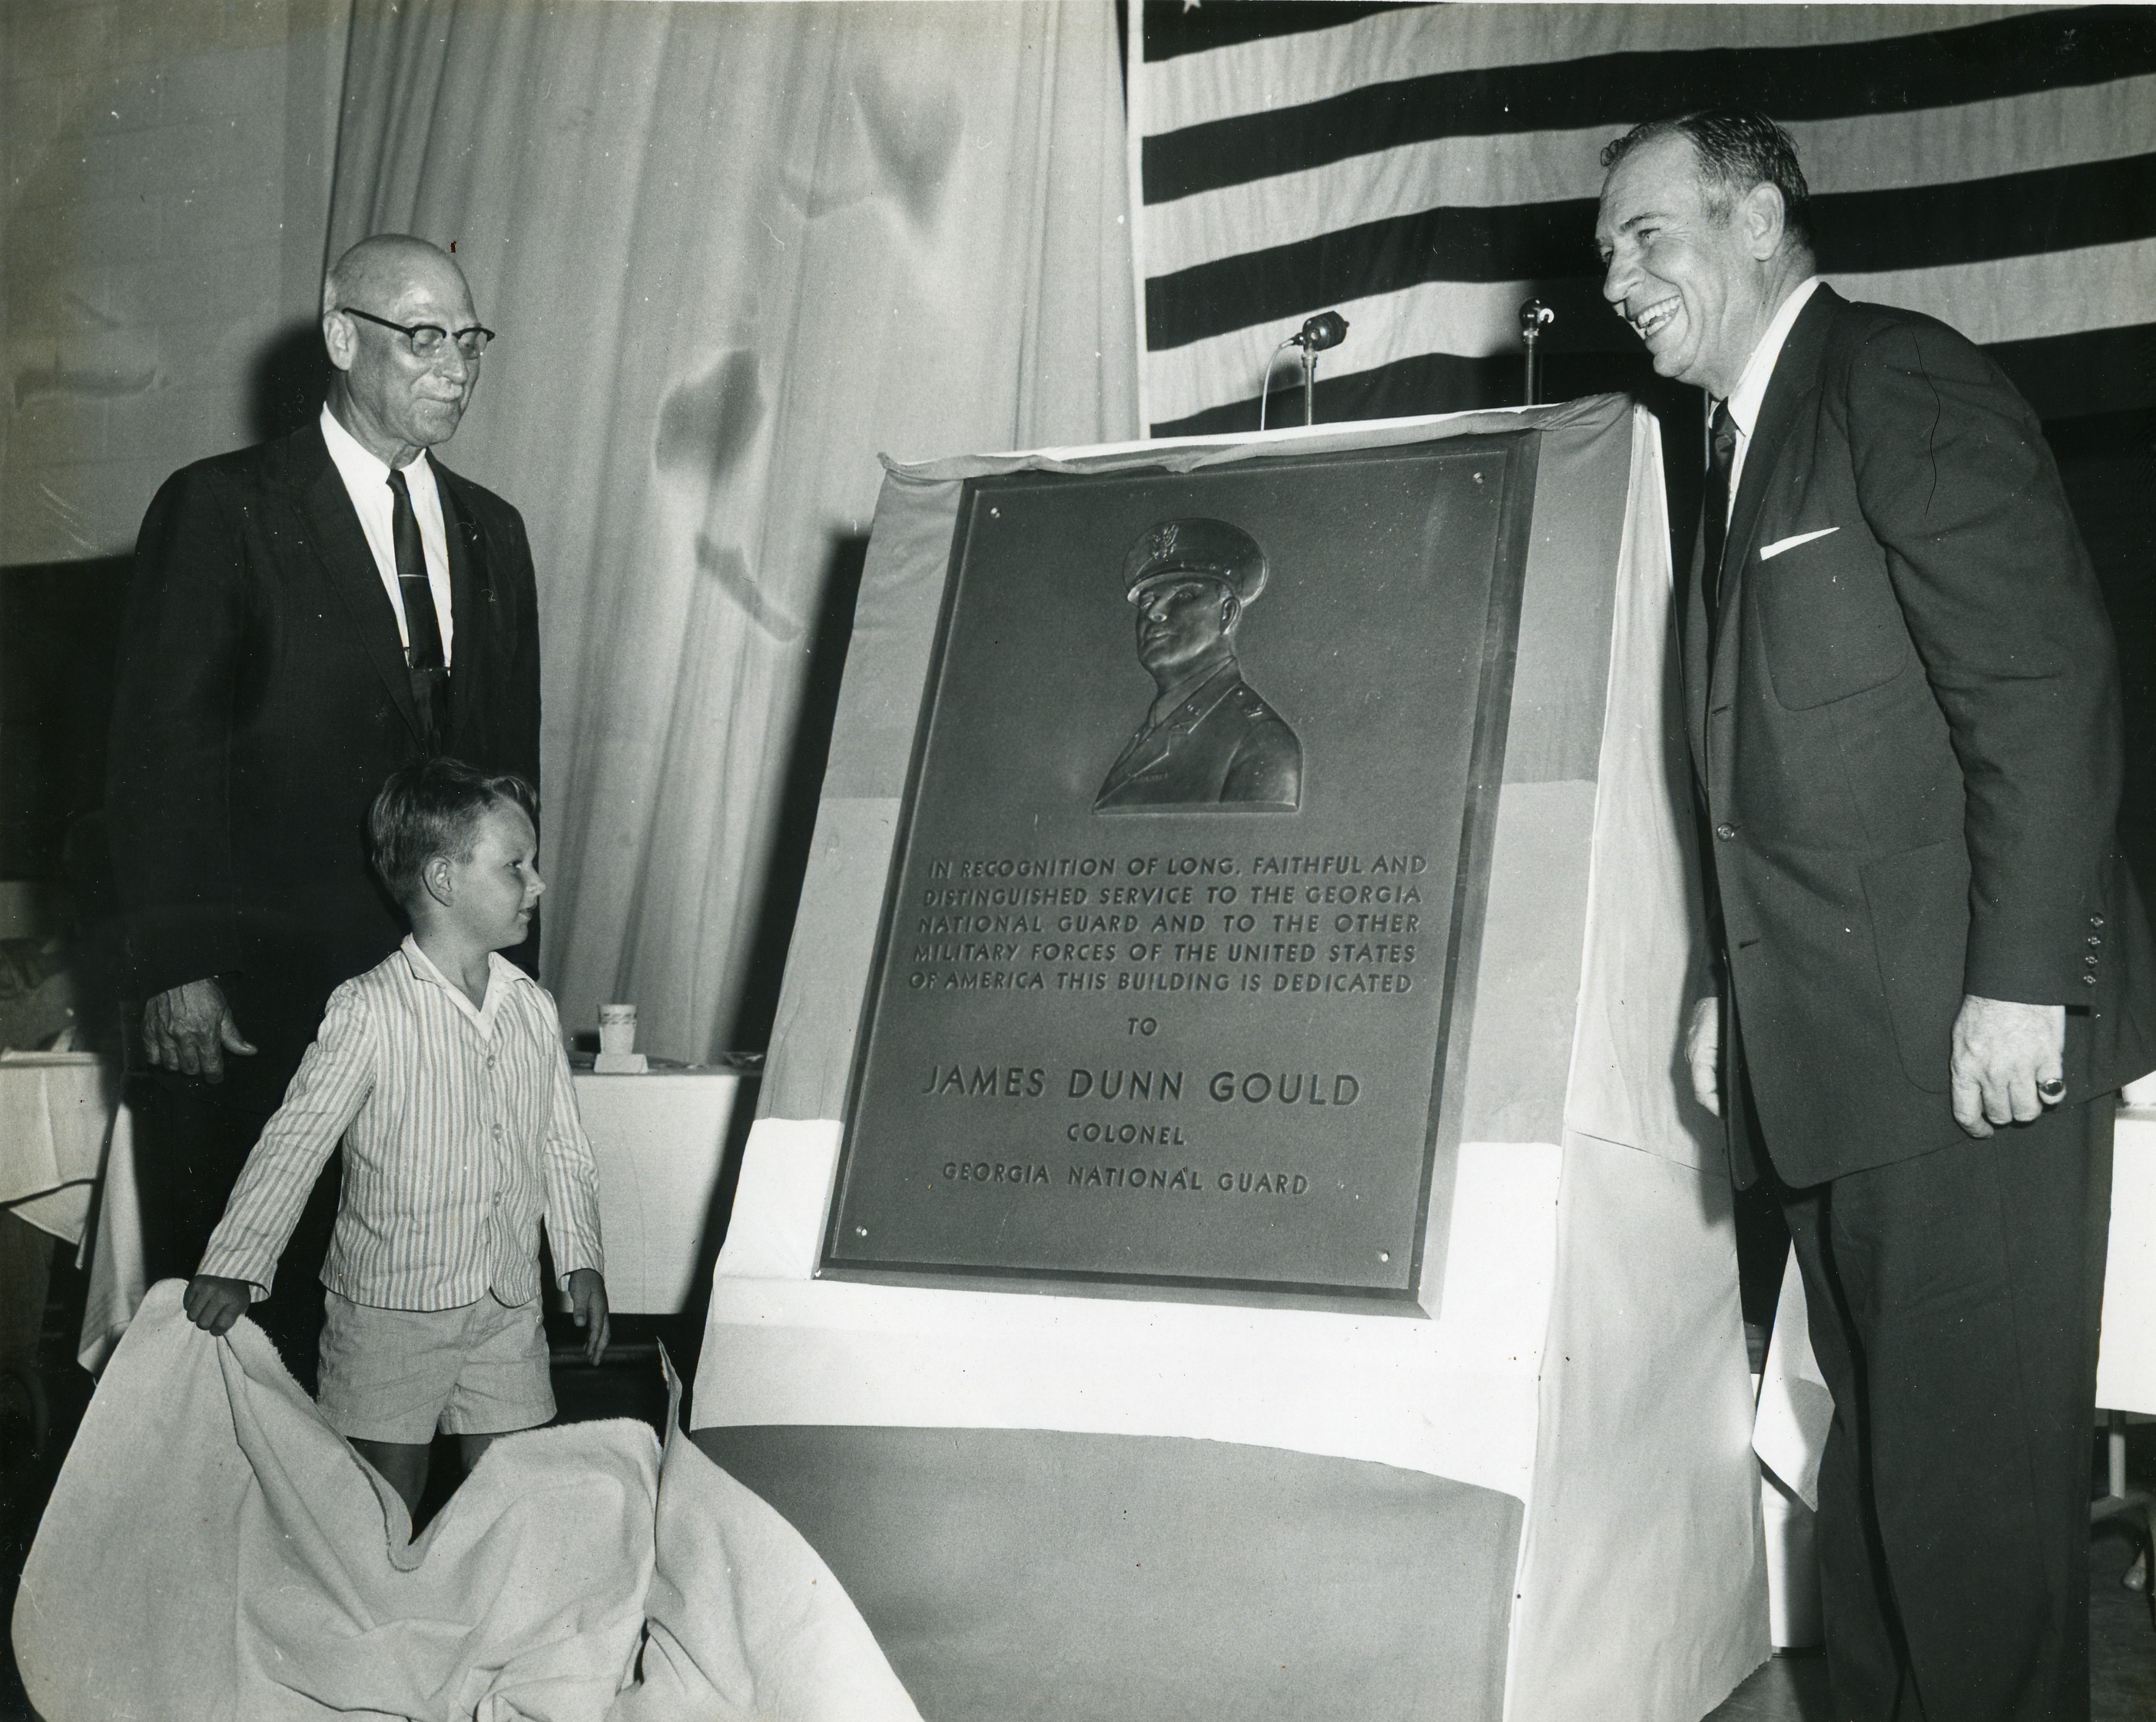 1-2 James Gould with xxxx receiving honor.jpg